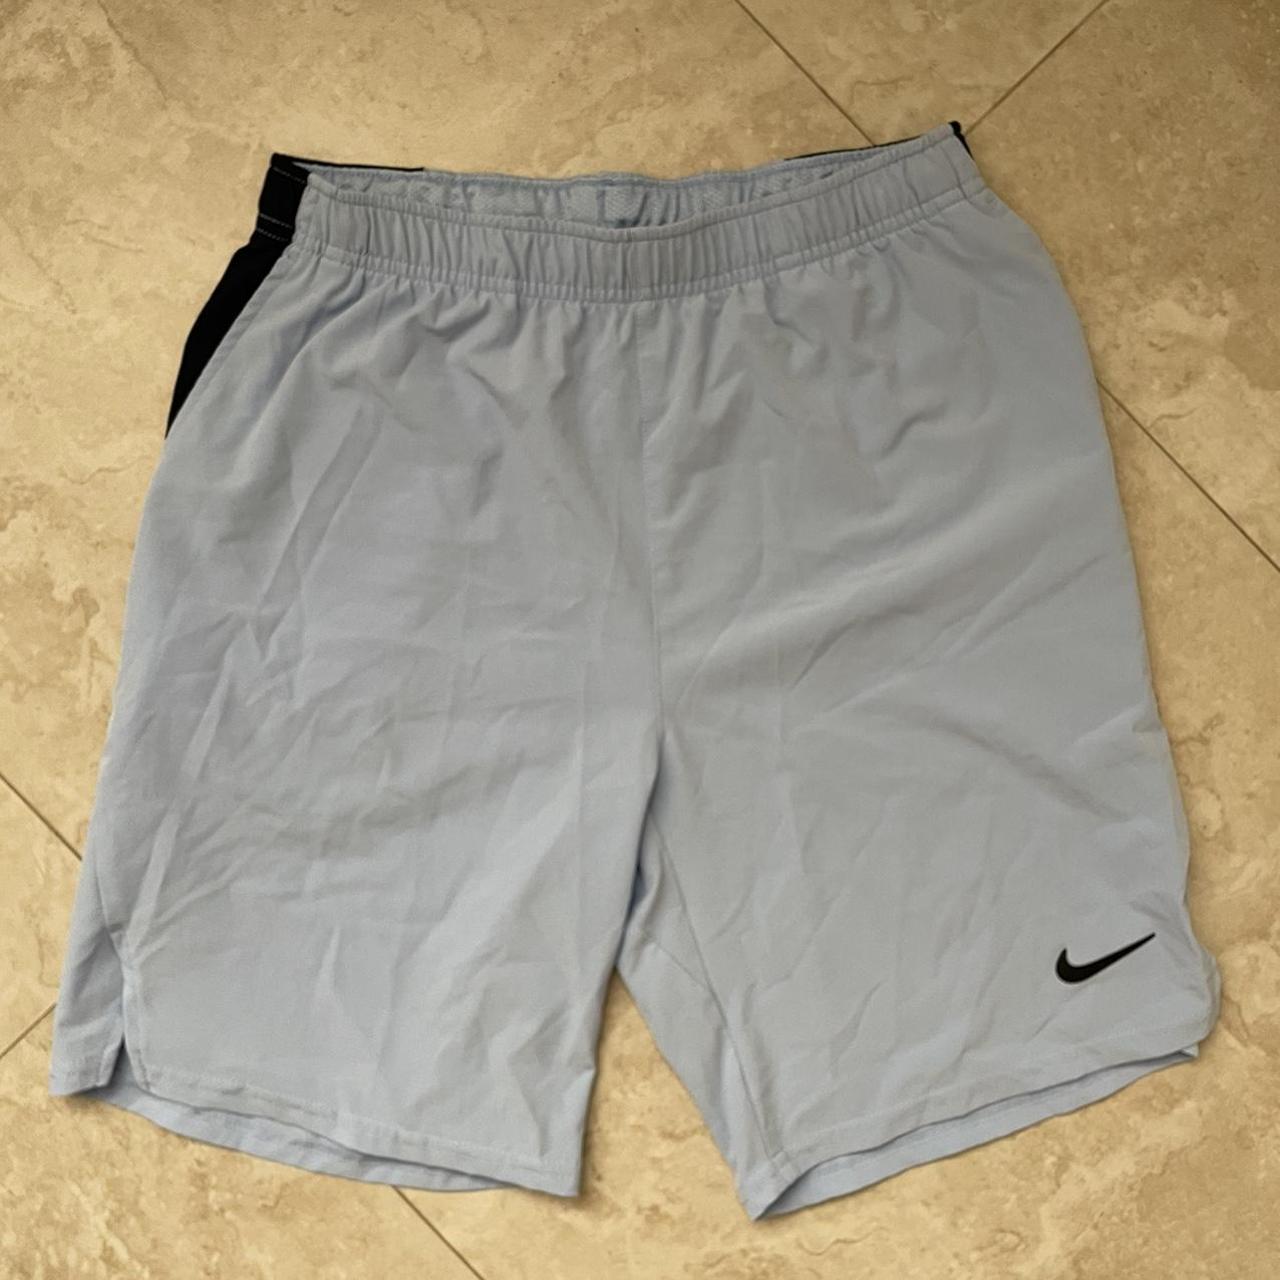 Nice Nike Dri-Fit shorts black and white boys XL GOOD CONDITION